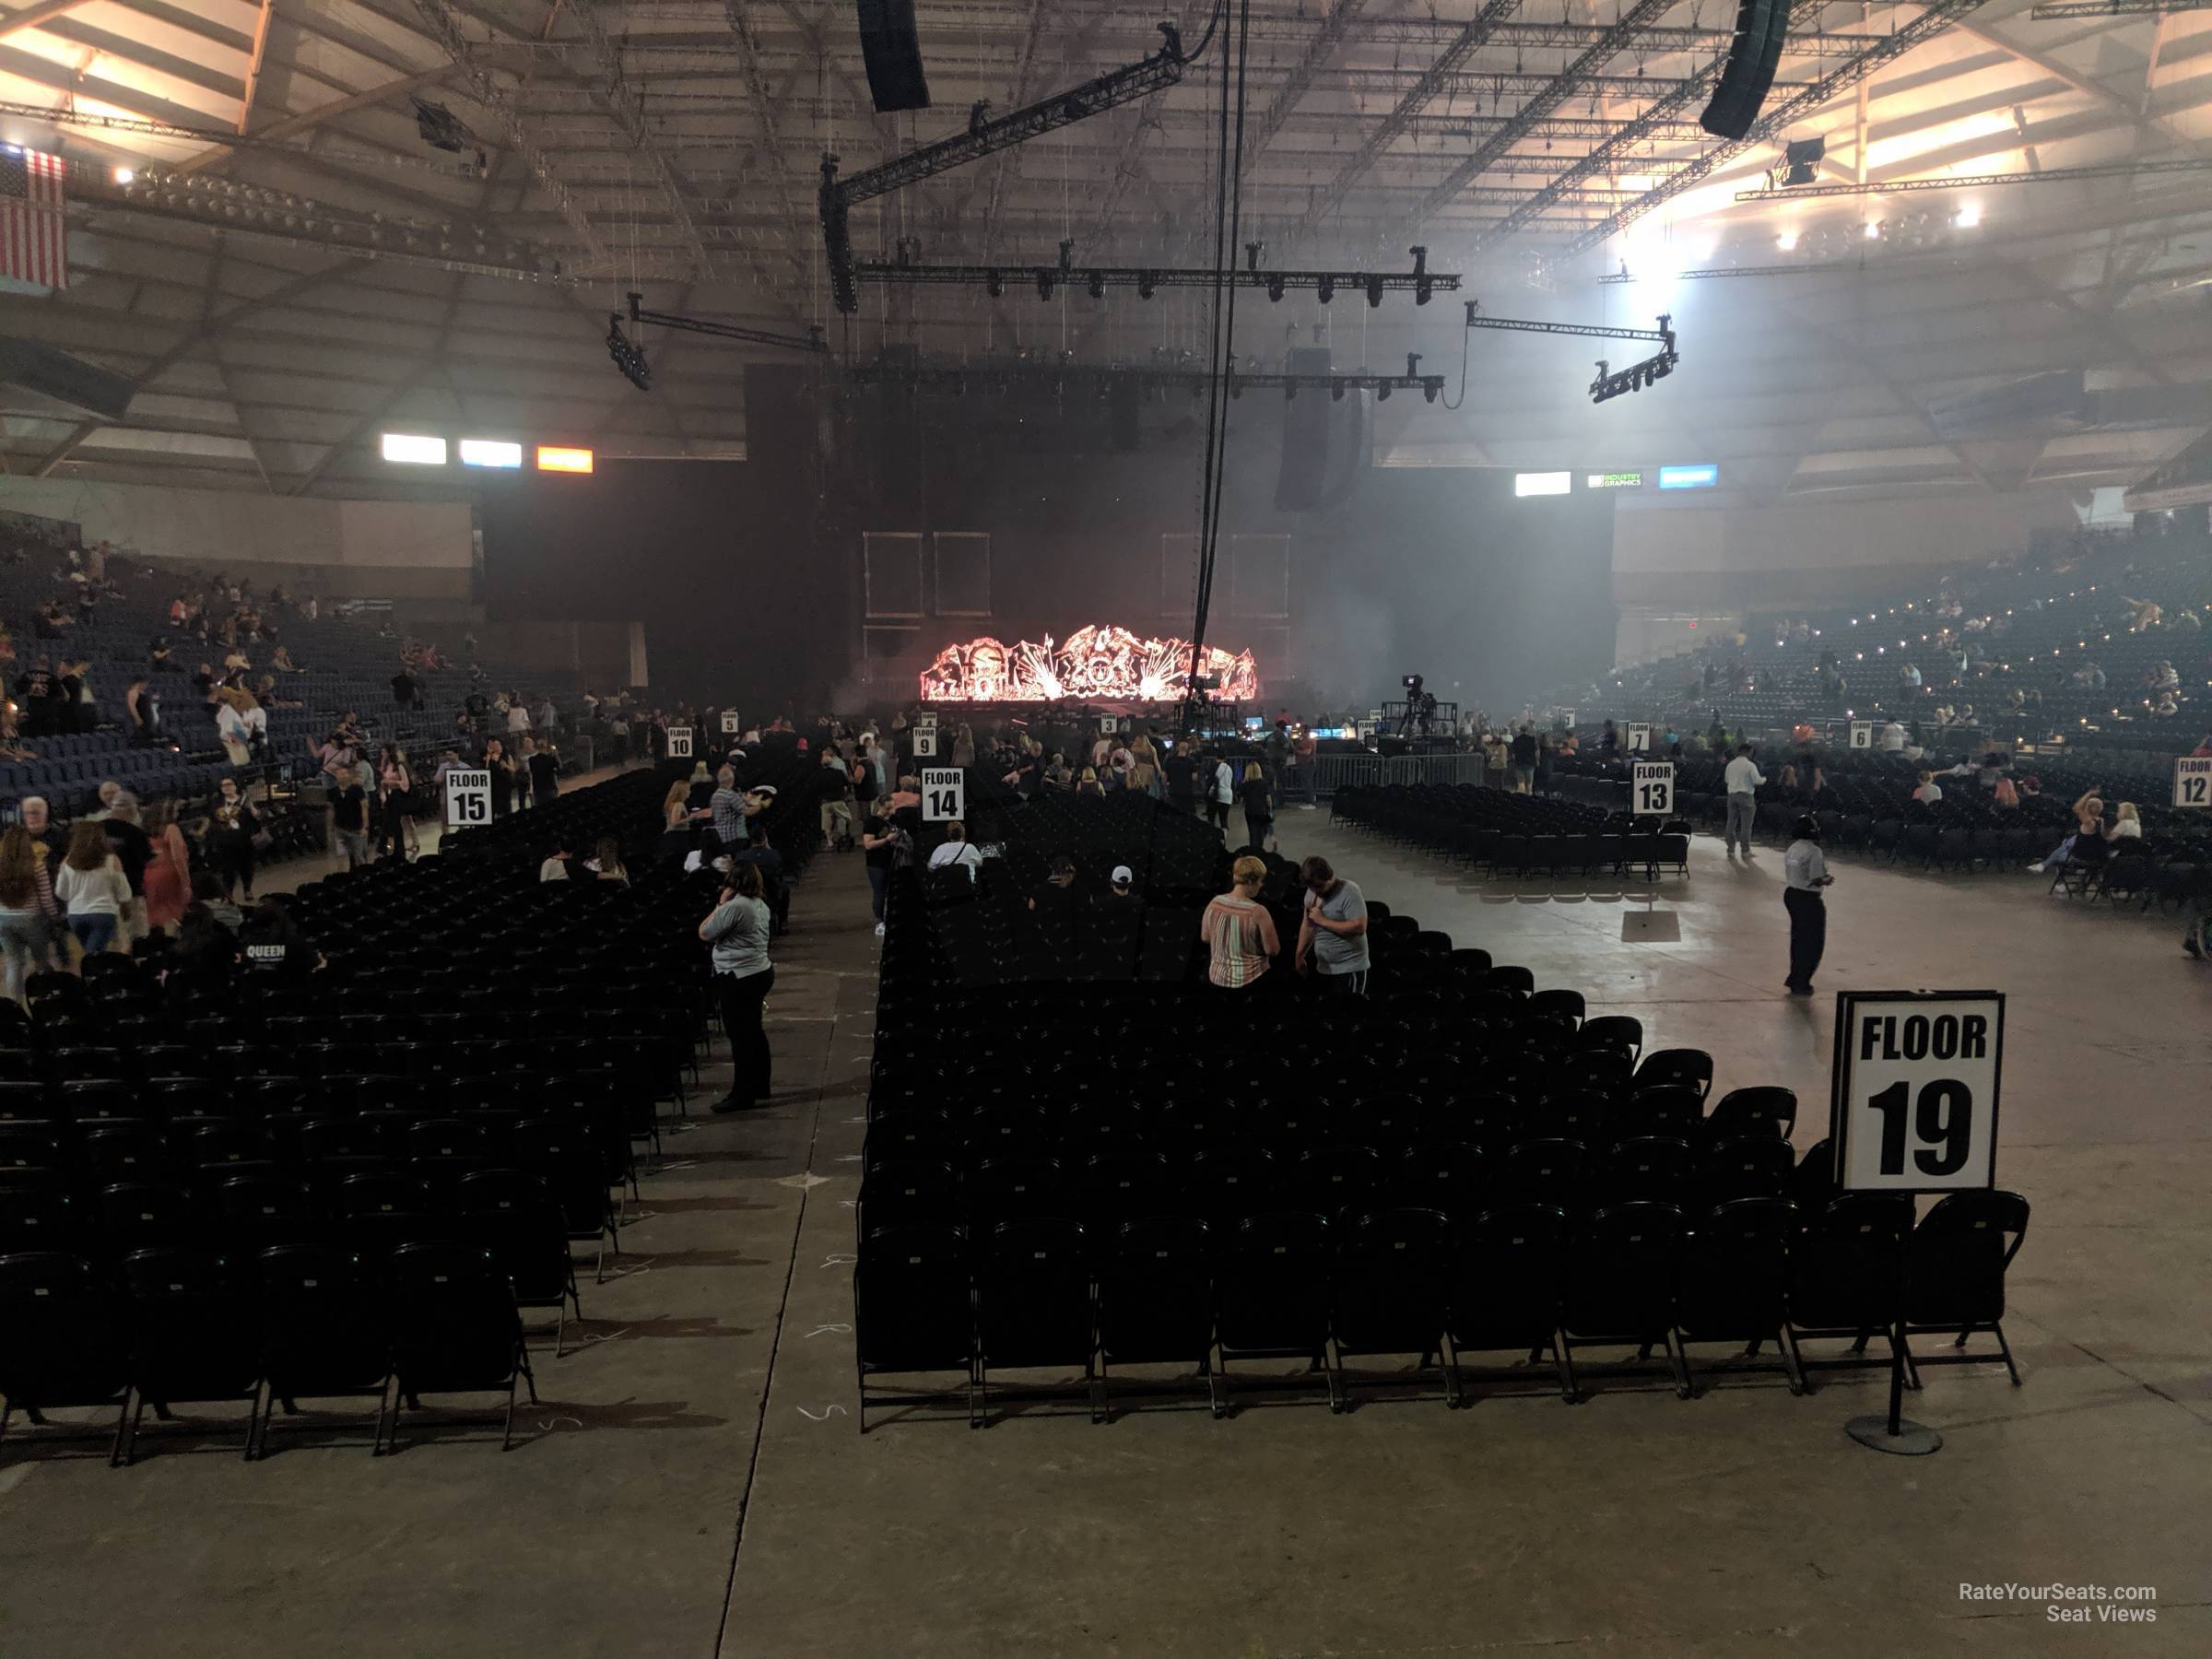 Tacoma Dome Section 110 - RateYourSeats.com